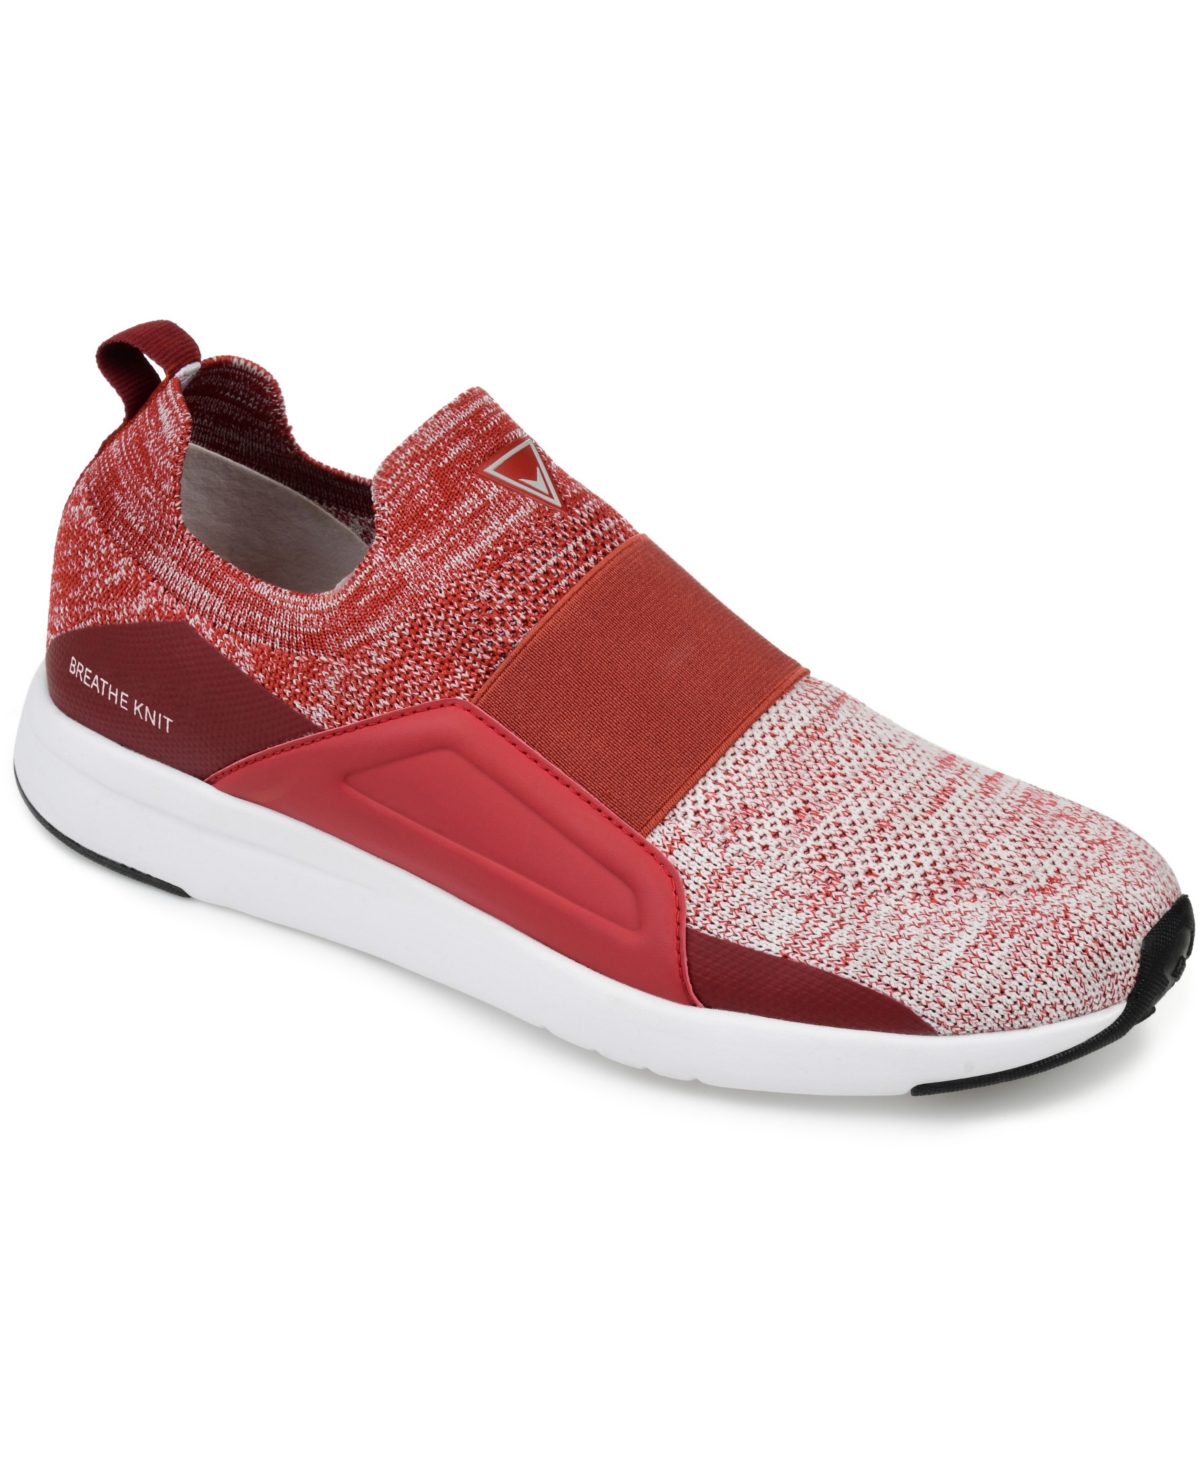 Men's Cannon Casual Slip-On Knit Walking Sneakers - Red